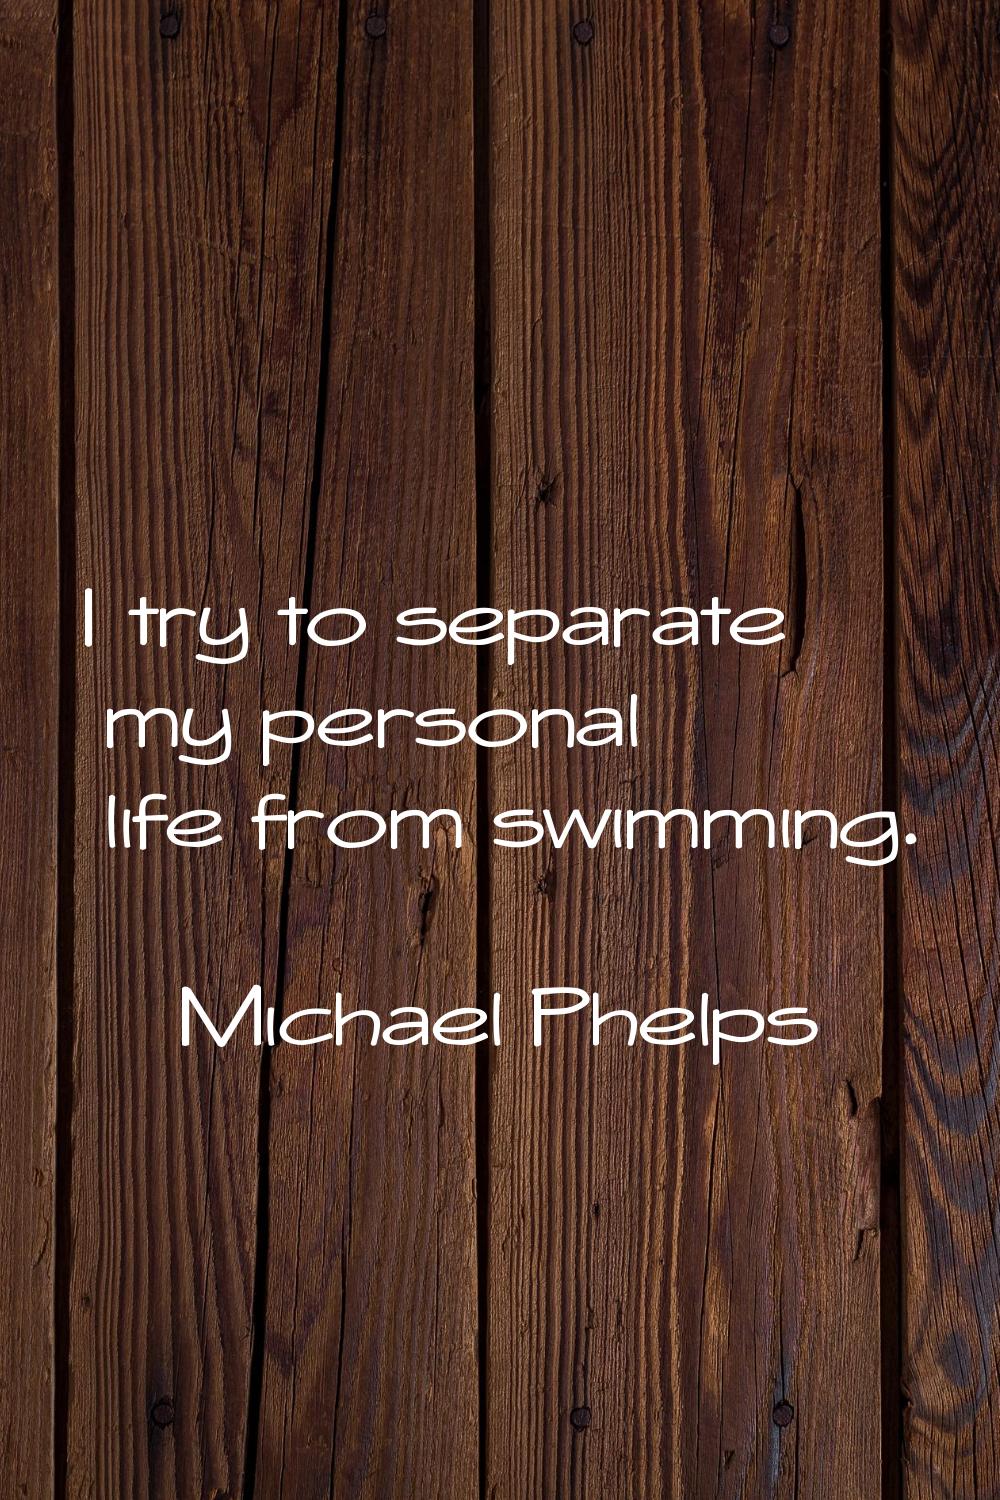 I try to separate my personal life from swimming.